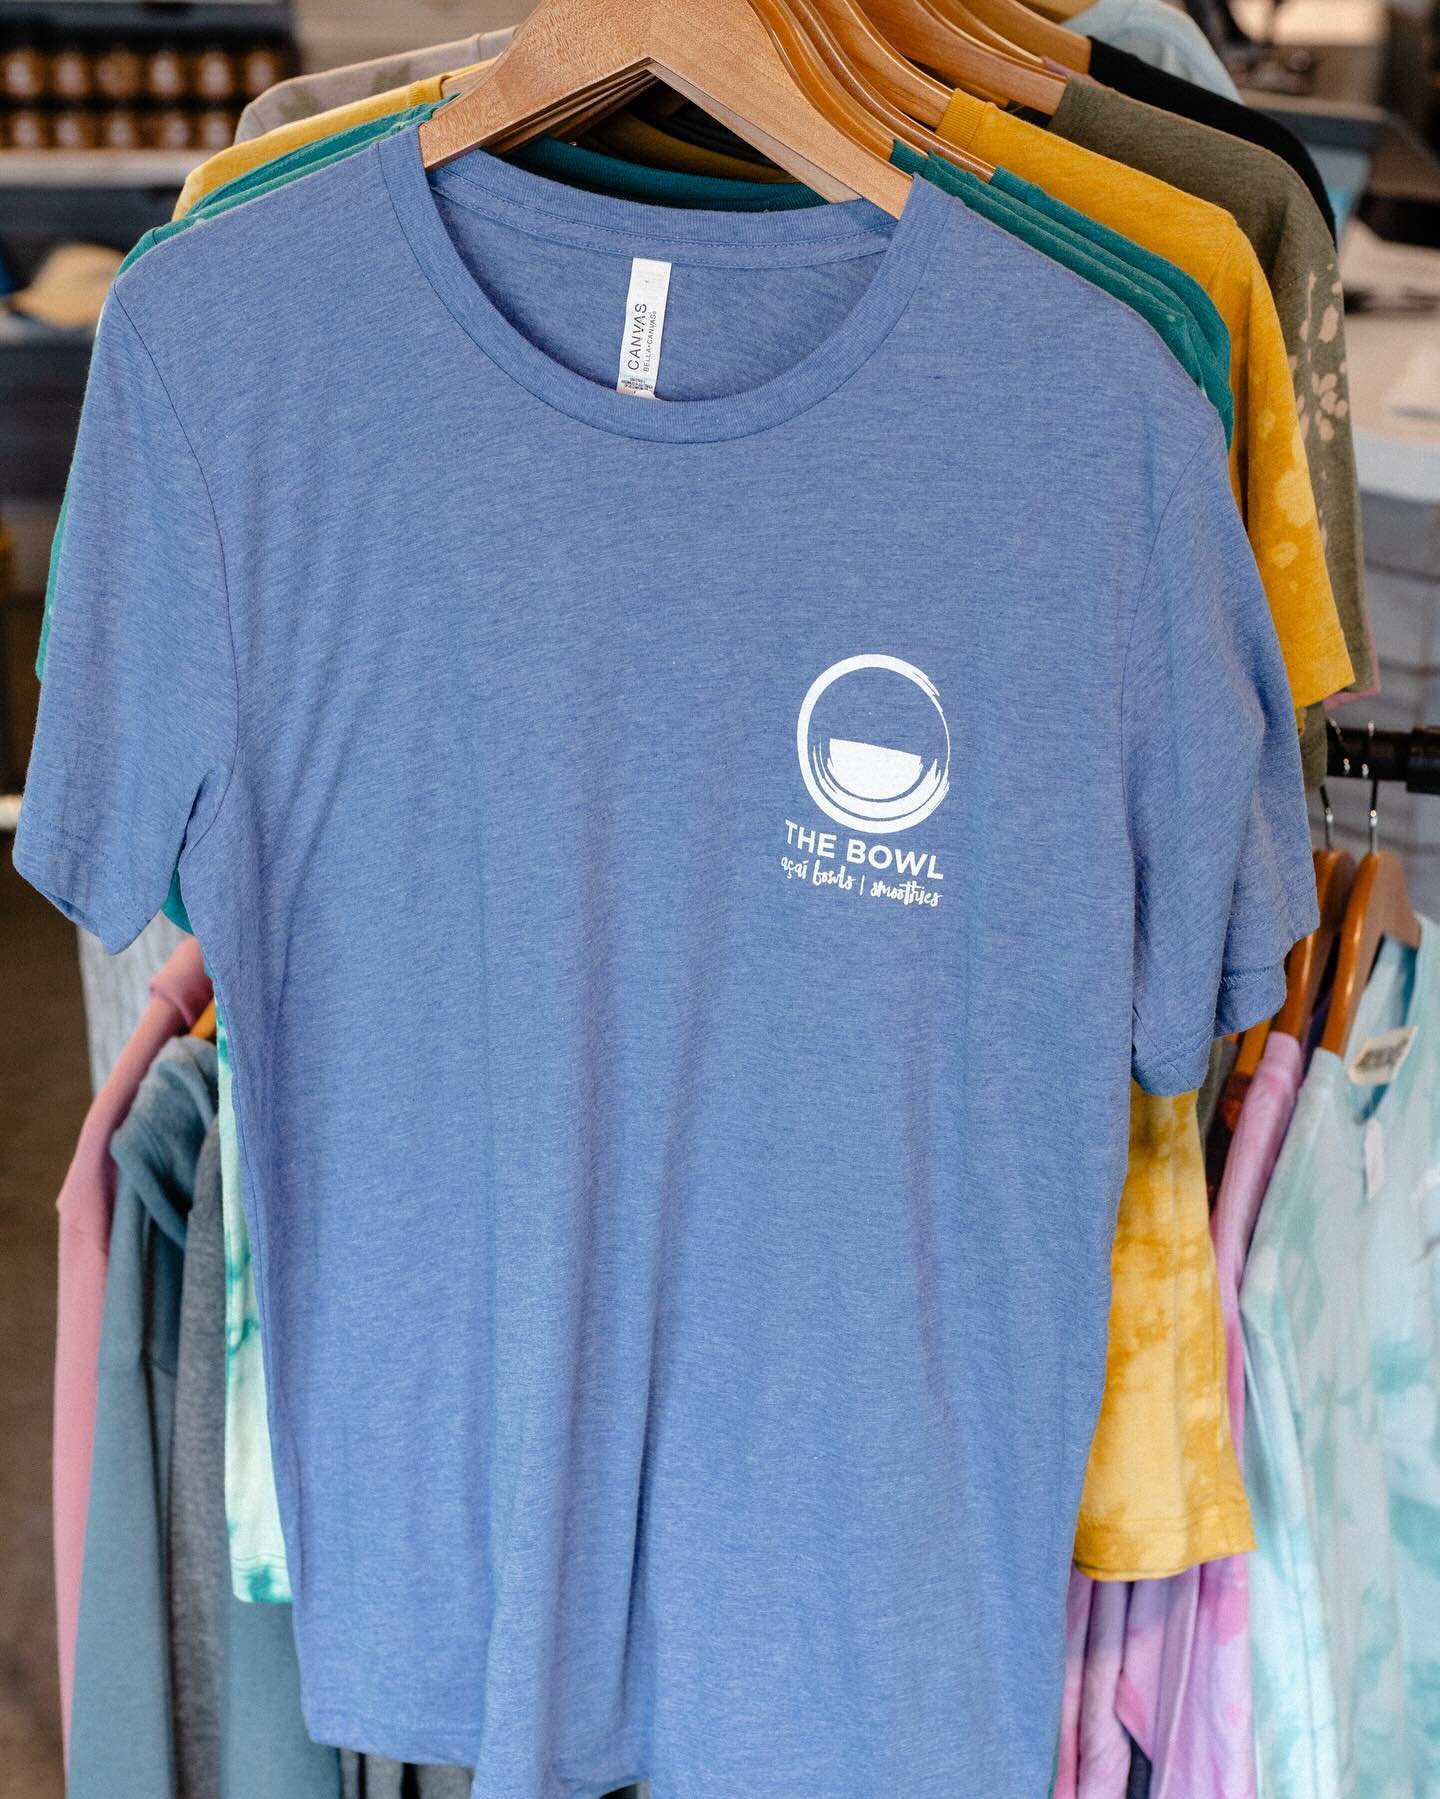 Shout out to some of our ✨summer essentials✨ while it&rsquo;s not necessarily &ldquo;summer&rdquo; it sure does feel like it 🌡️☀️ come stock up on our super soft + loose T-Shirts. They come in so many fun colors and are easy breezey to toss on for t